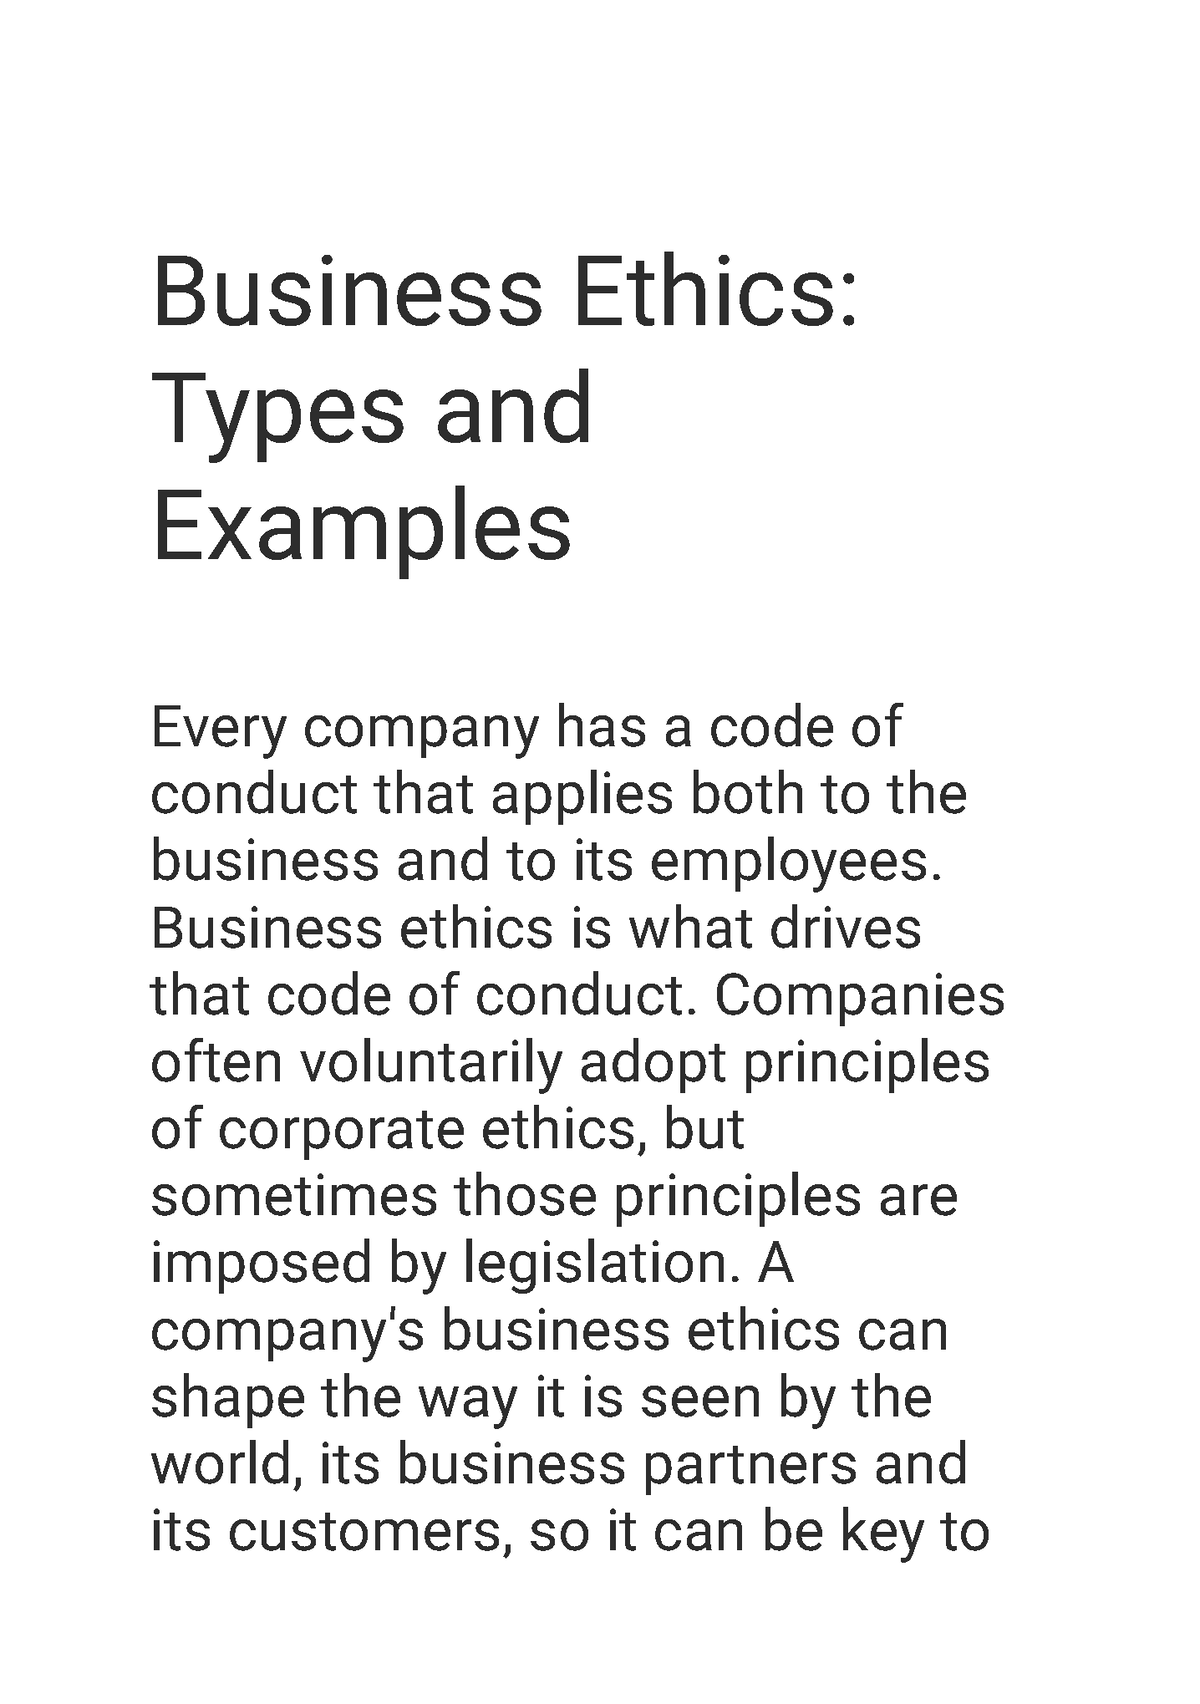 case study about business ethics with questions